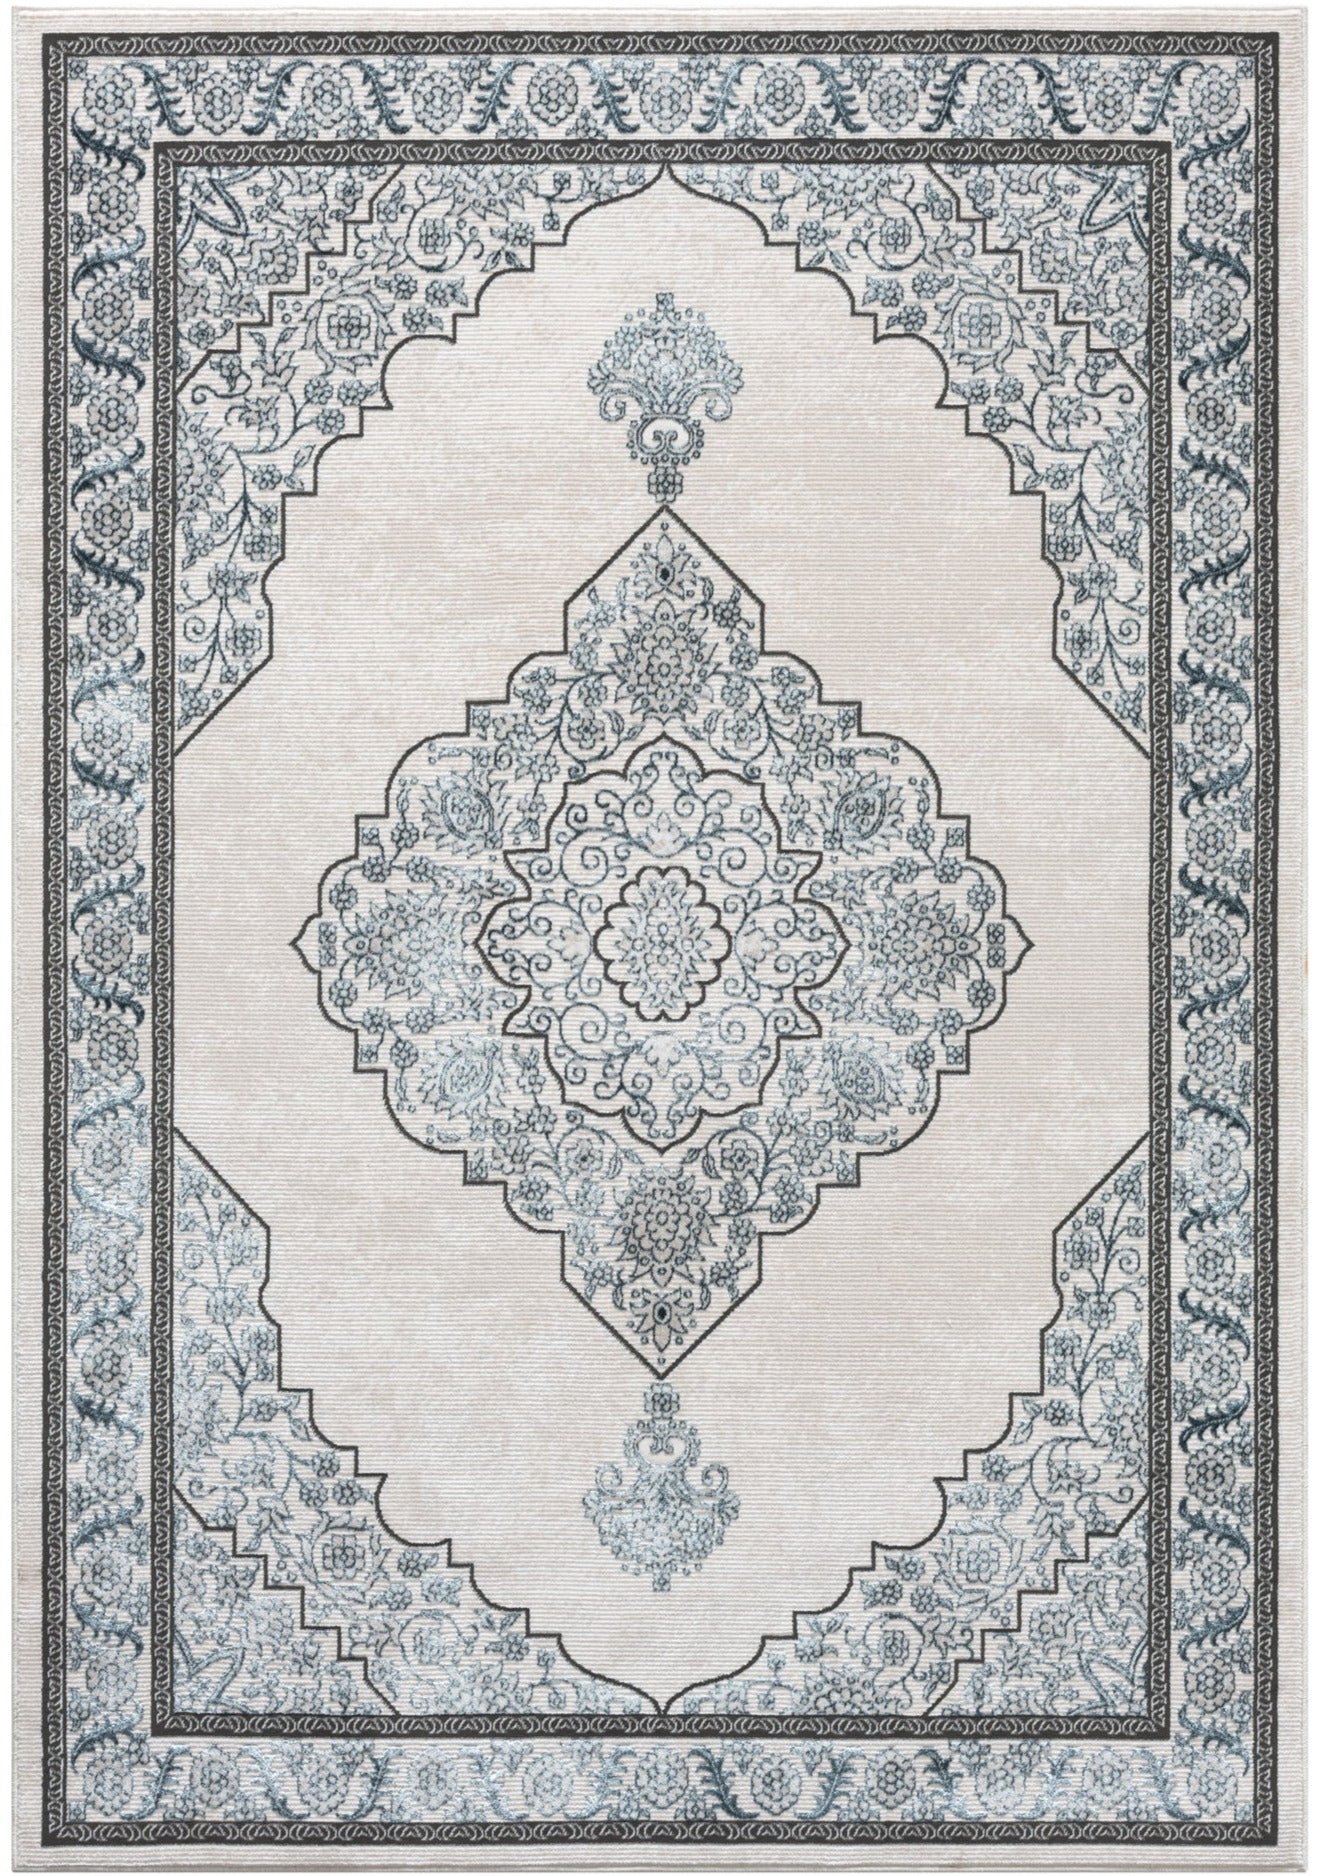 American cover design / Persian weavers Boutique 452 Frost Rug